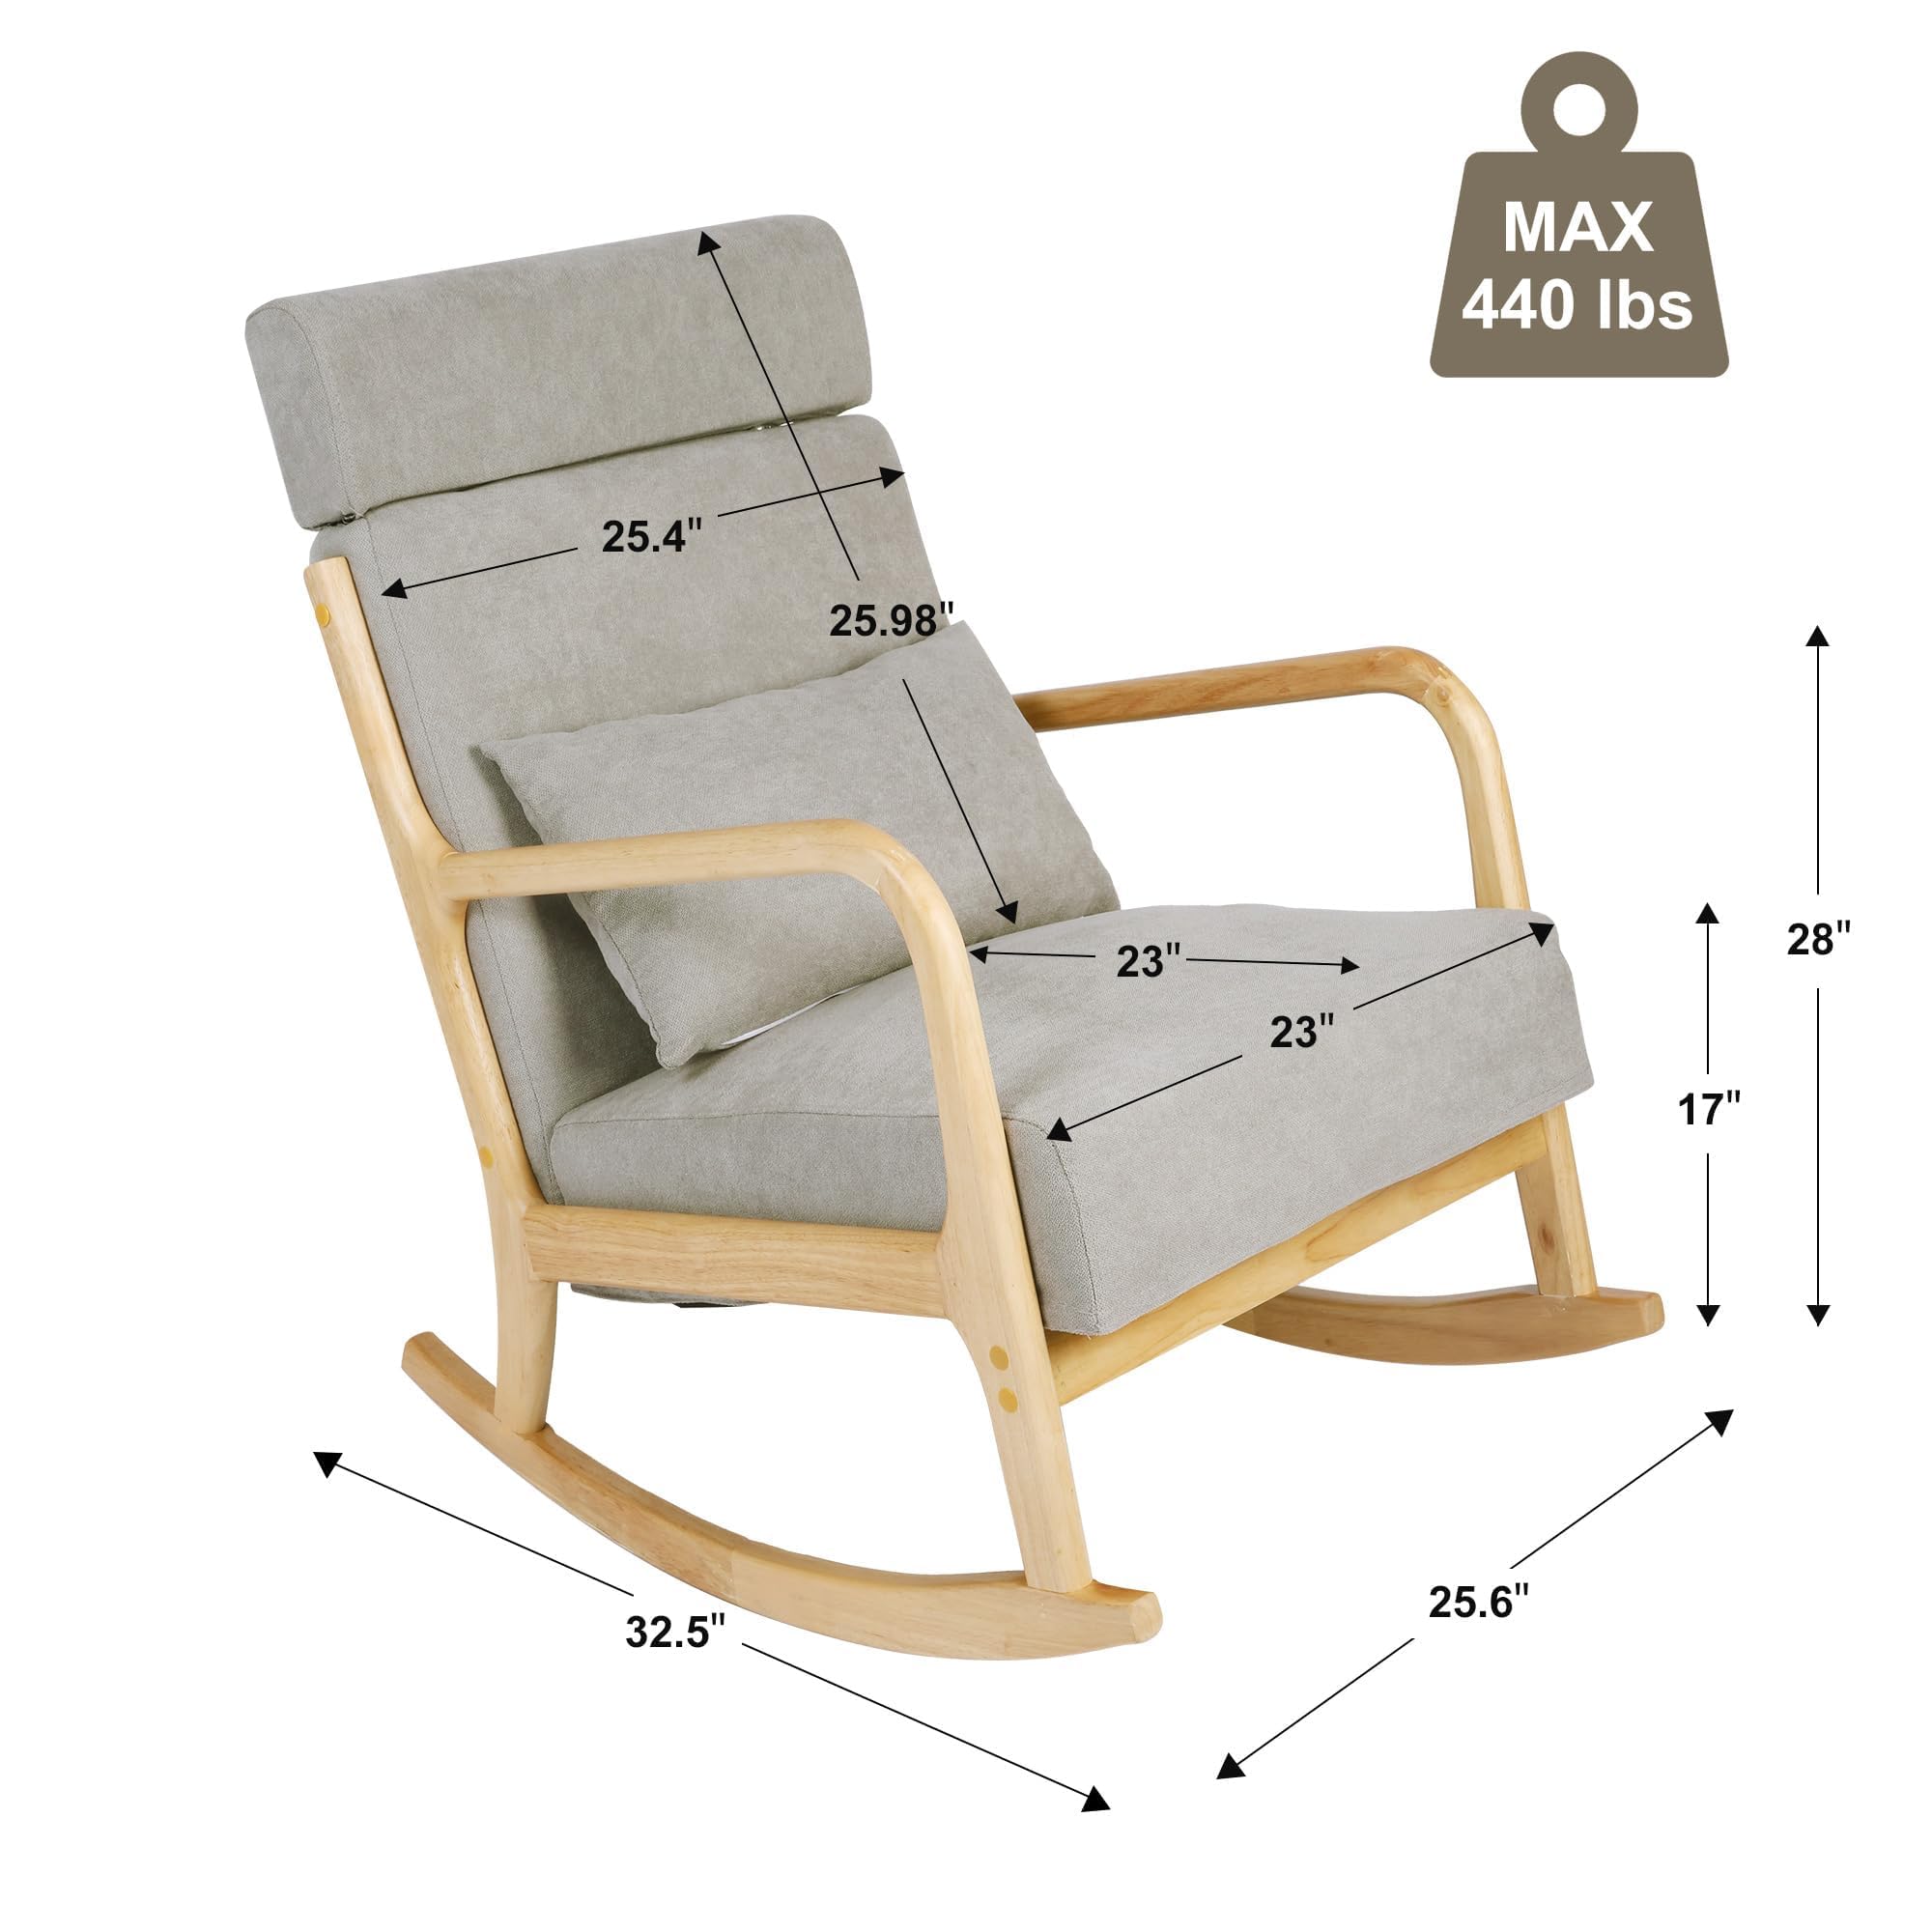 LUCKYERMORE Rocking Chair Nursery with Solid Wood Legs,Glider Chair with High Backrest,Upholstered Glider Rocker Chair for Nursery Bedroom Living Room, Grey